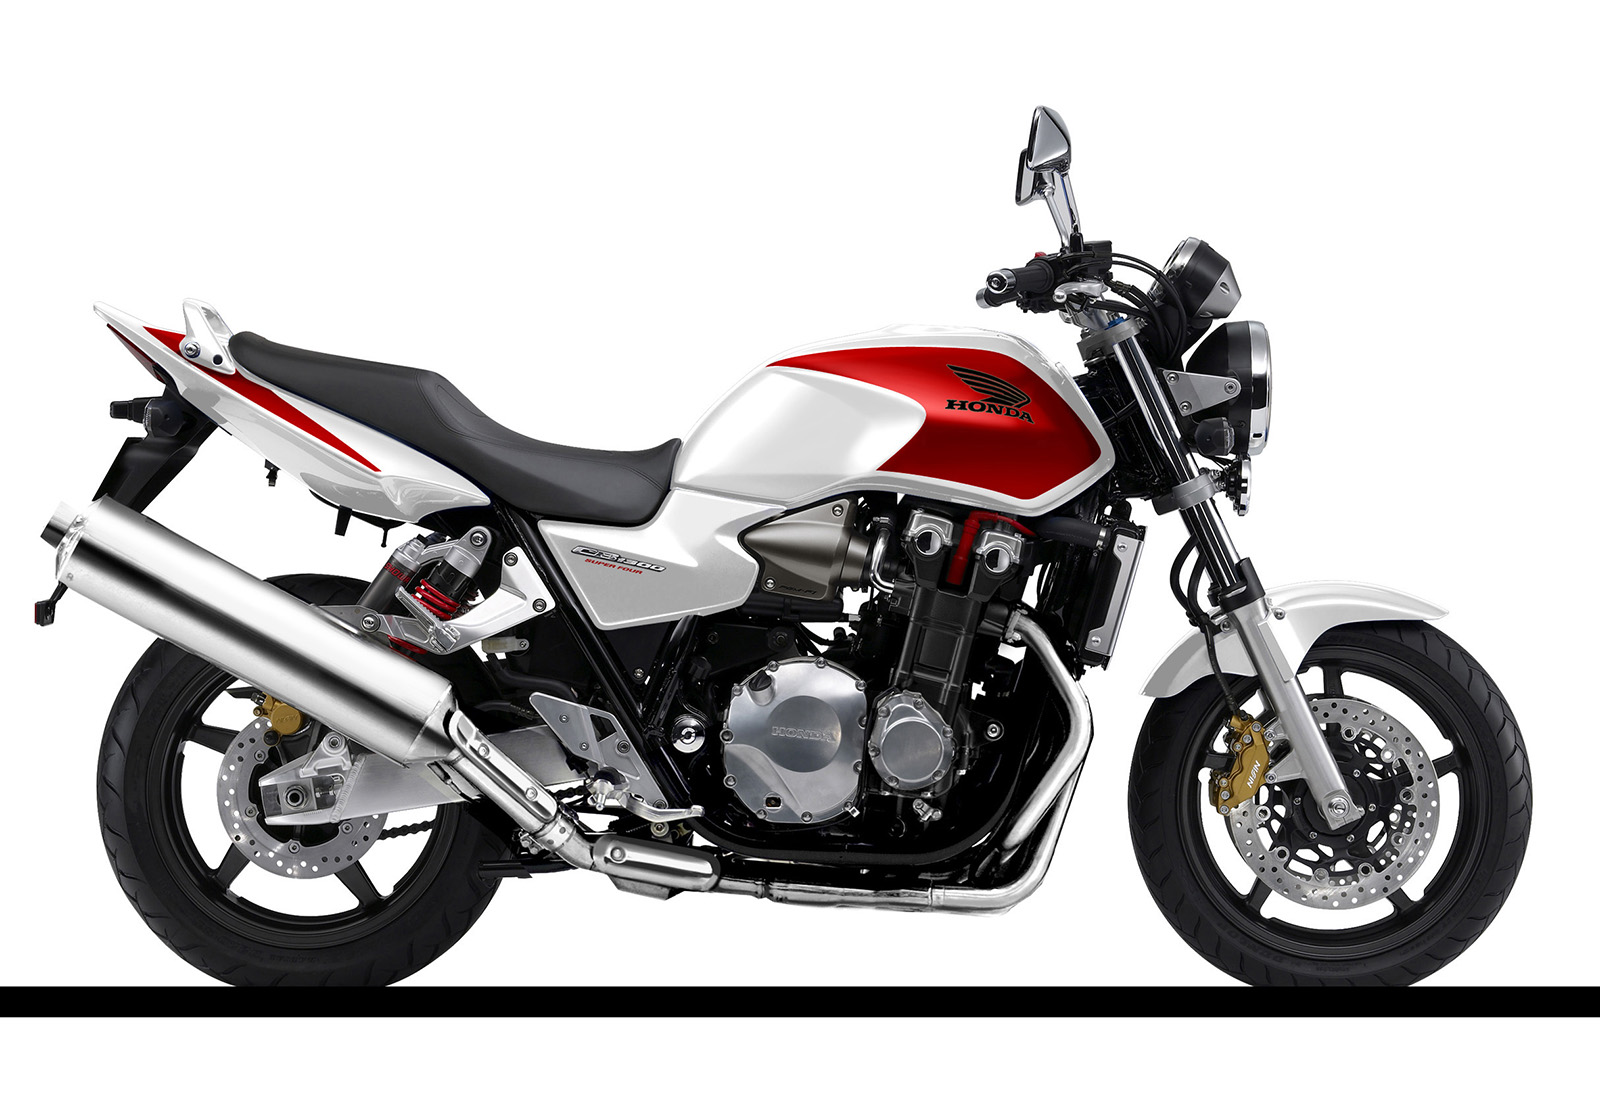 CB1300 SUPER FOUR[2008]final drawing